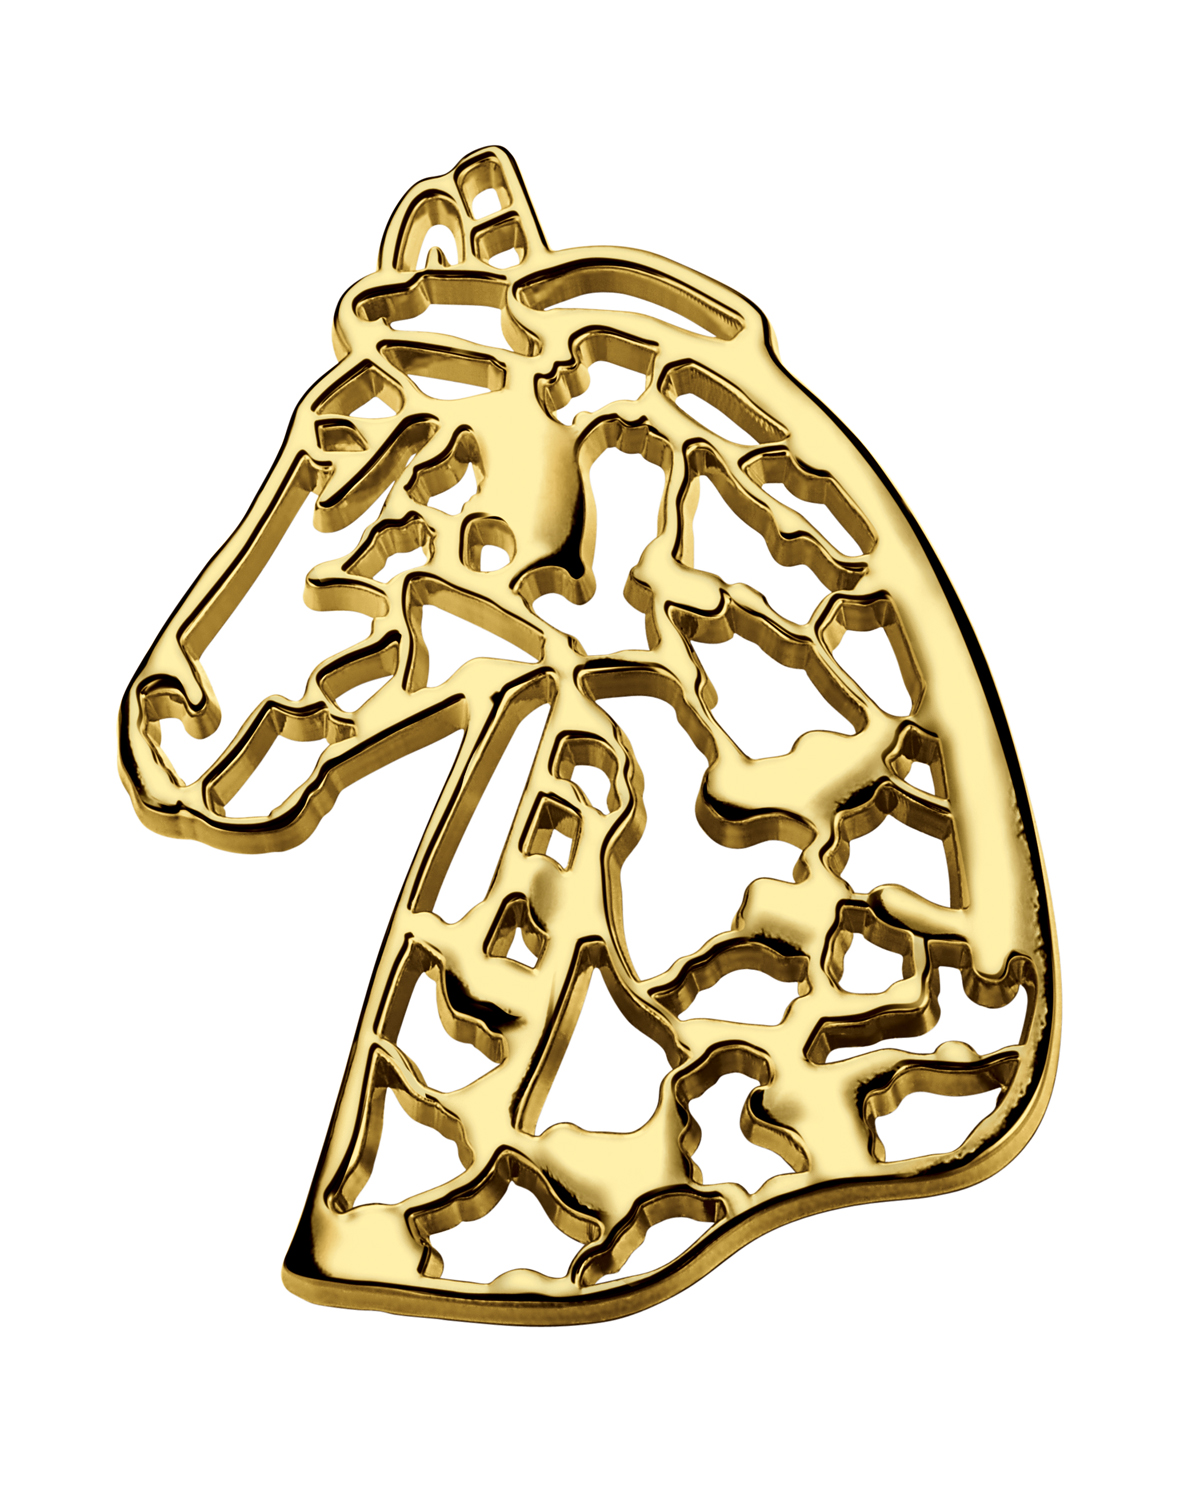 Each racegoer will receive a limited edition brooch on 5 November (while stock lasts)